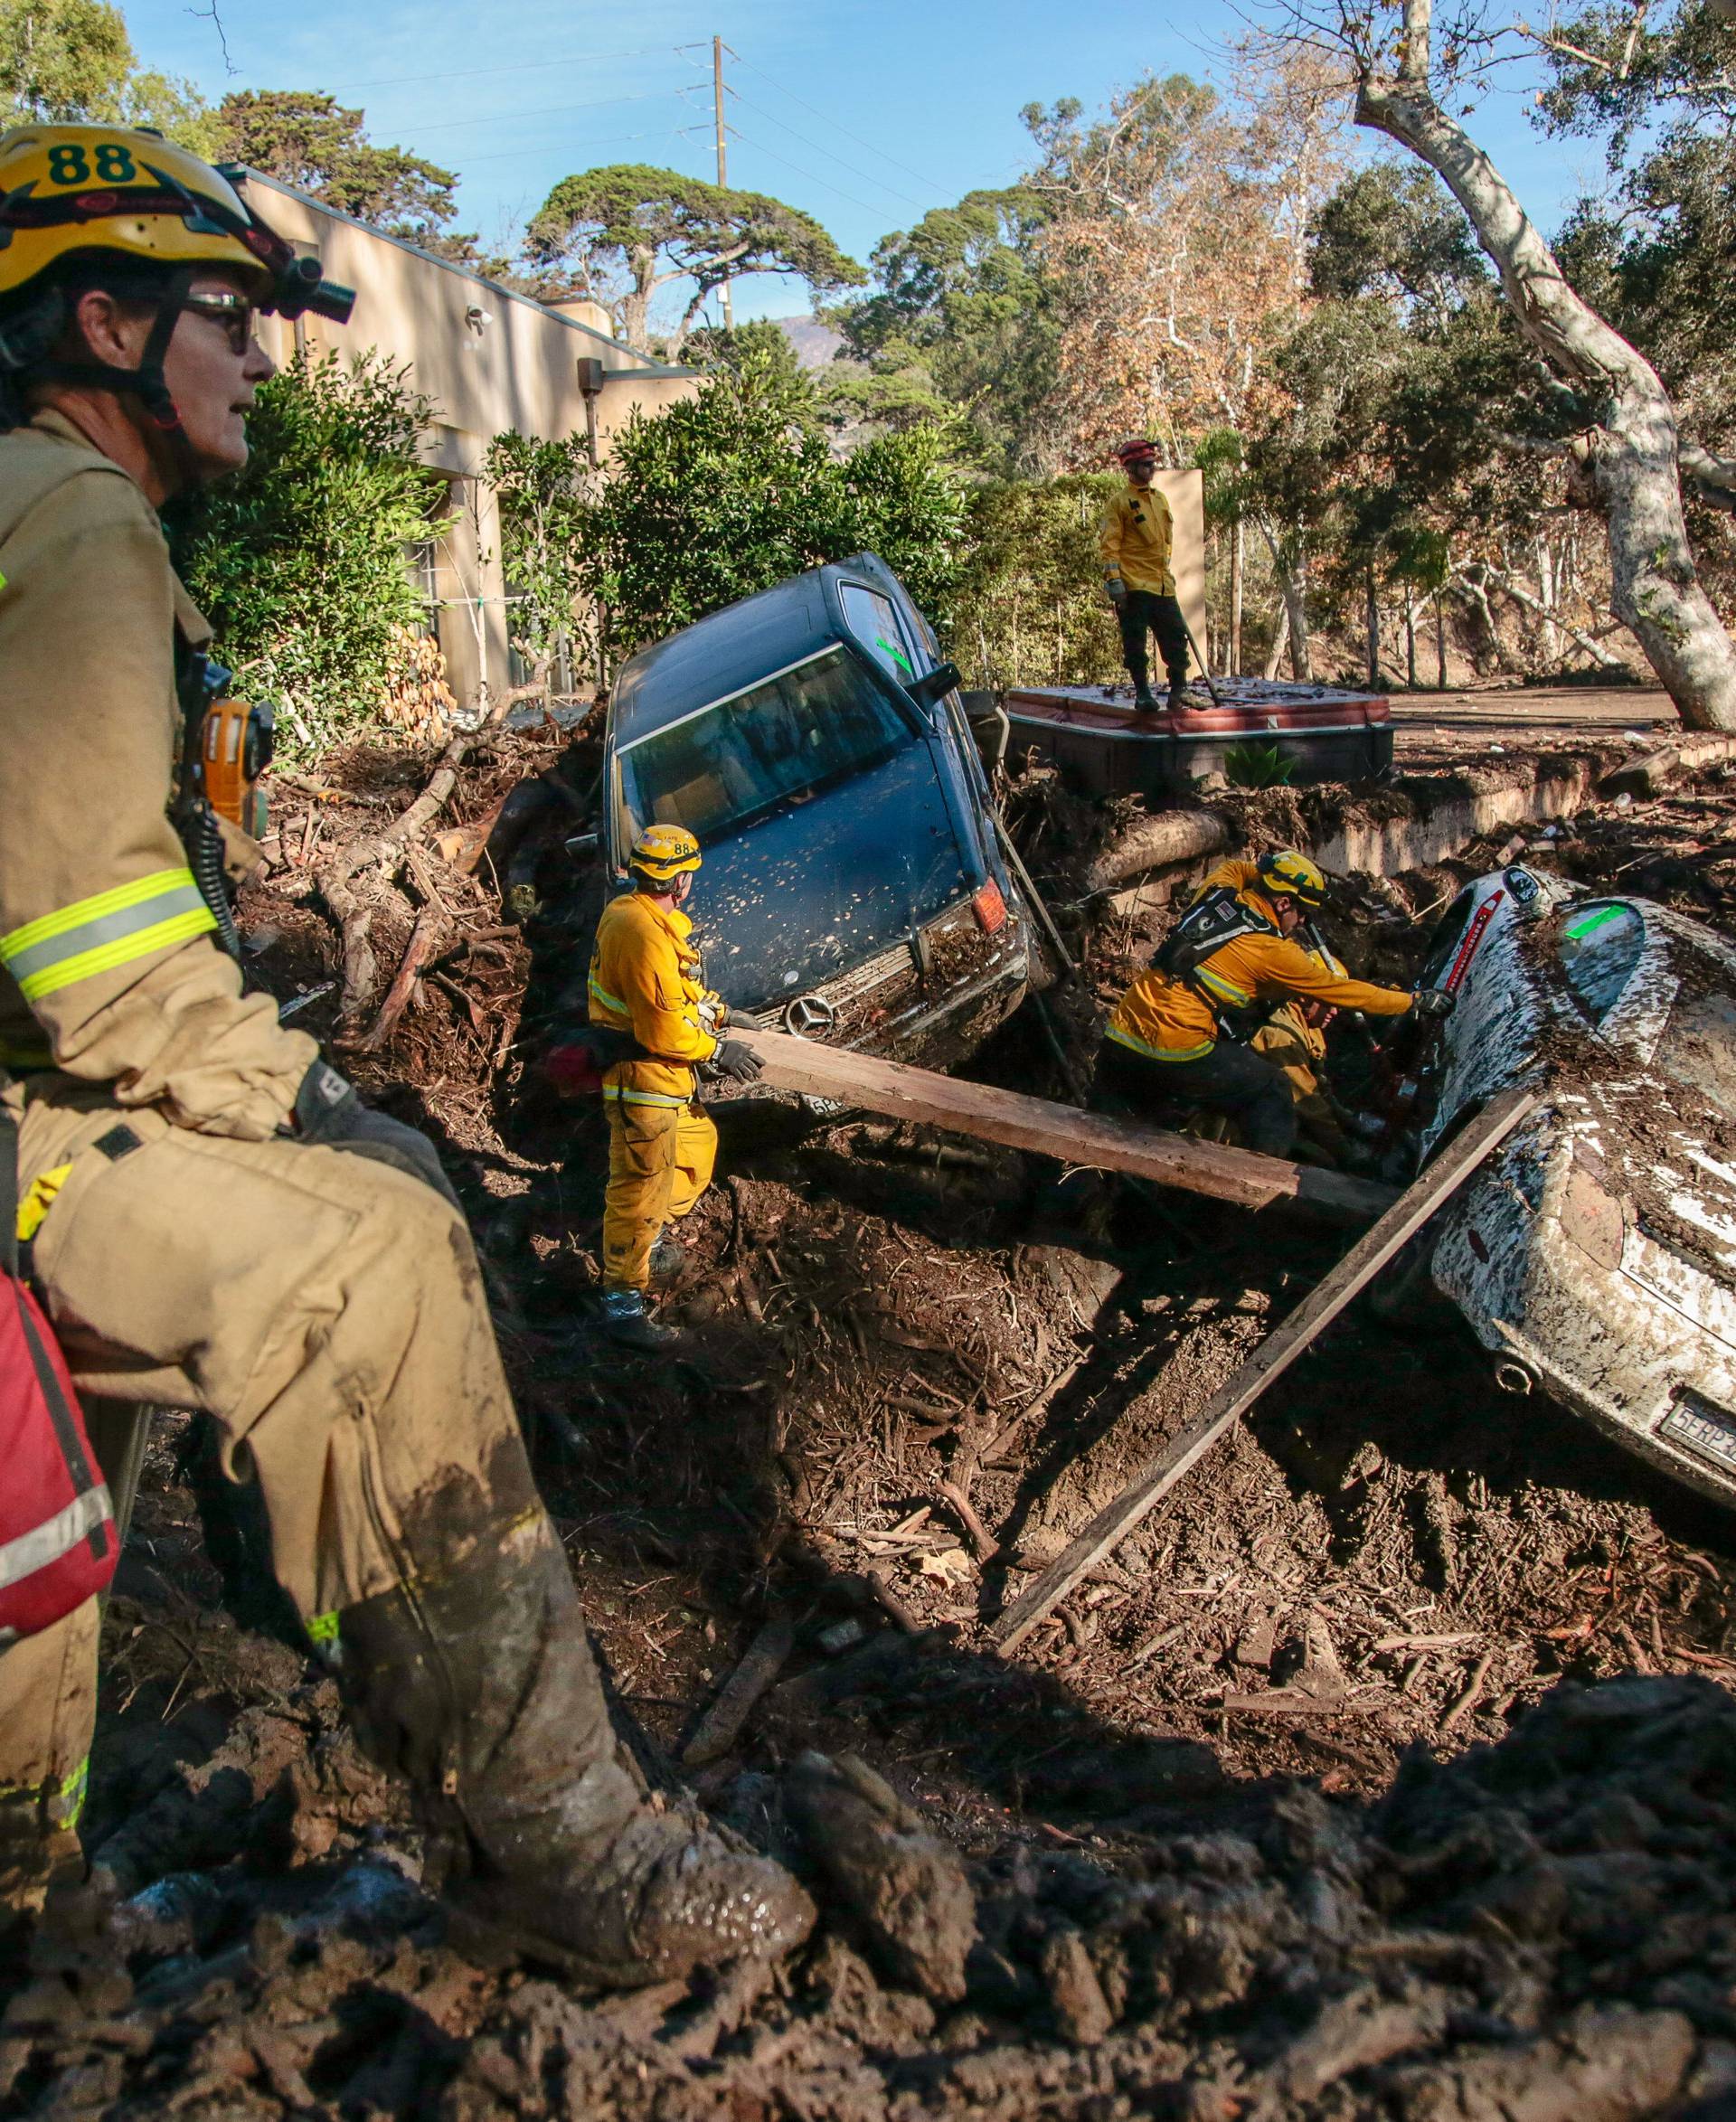 Rescue workers scour through cars after a mudslide in Montecito